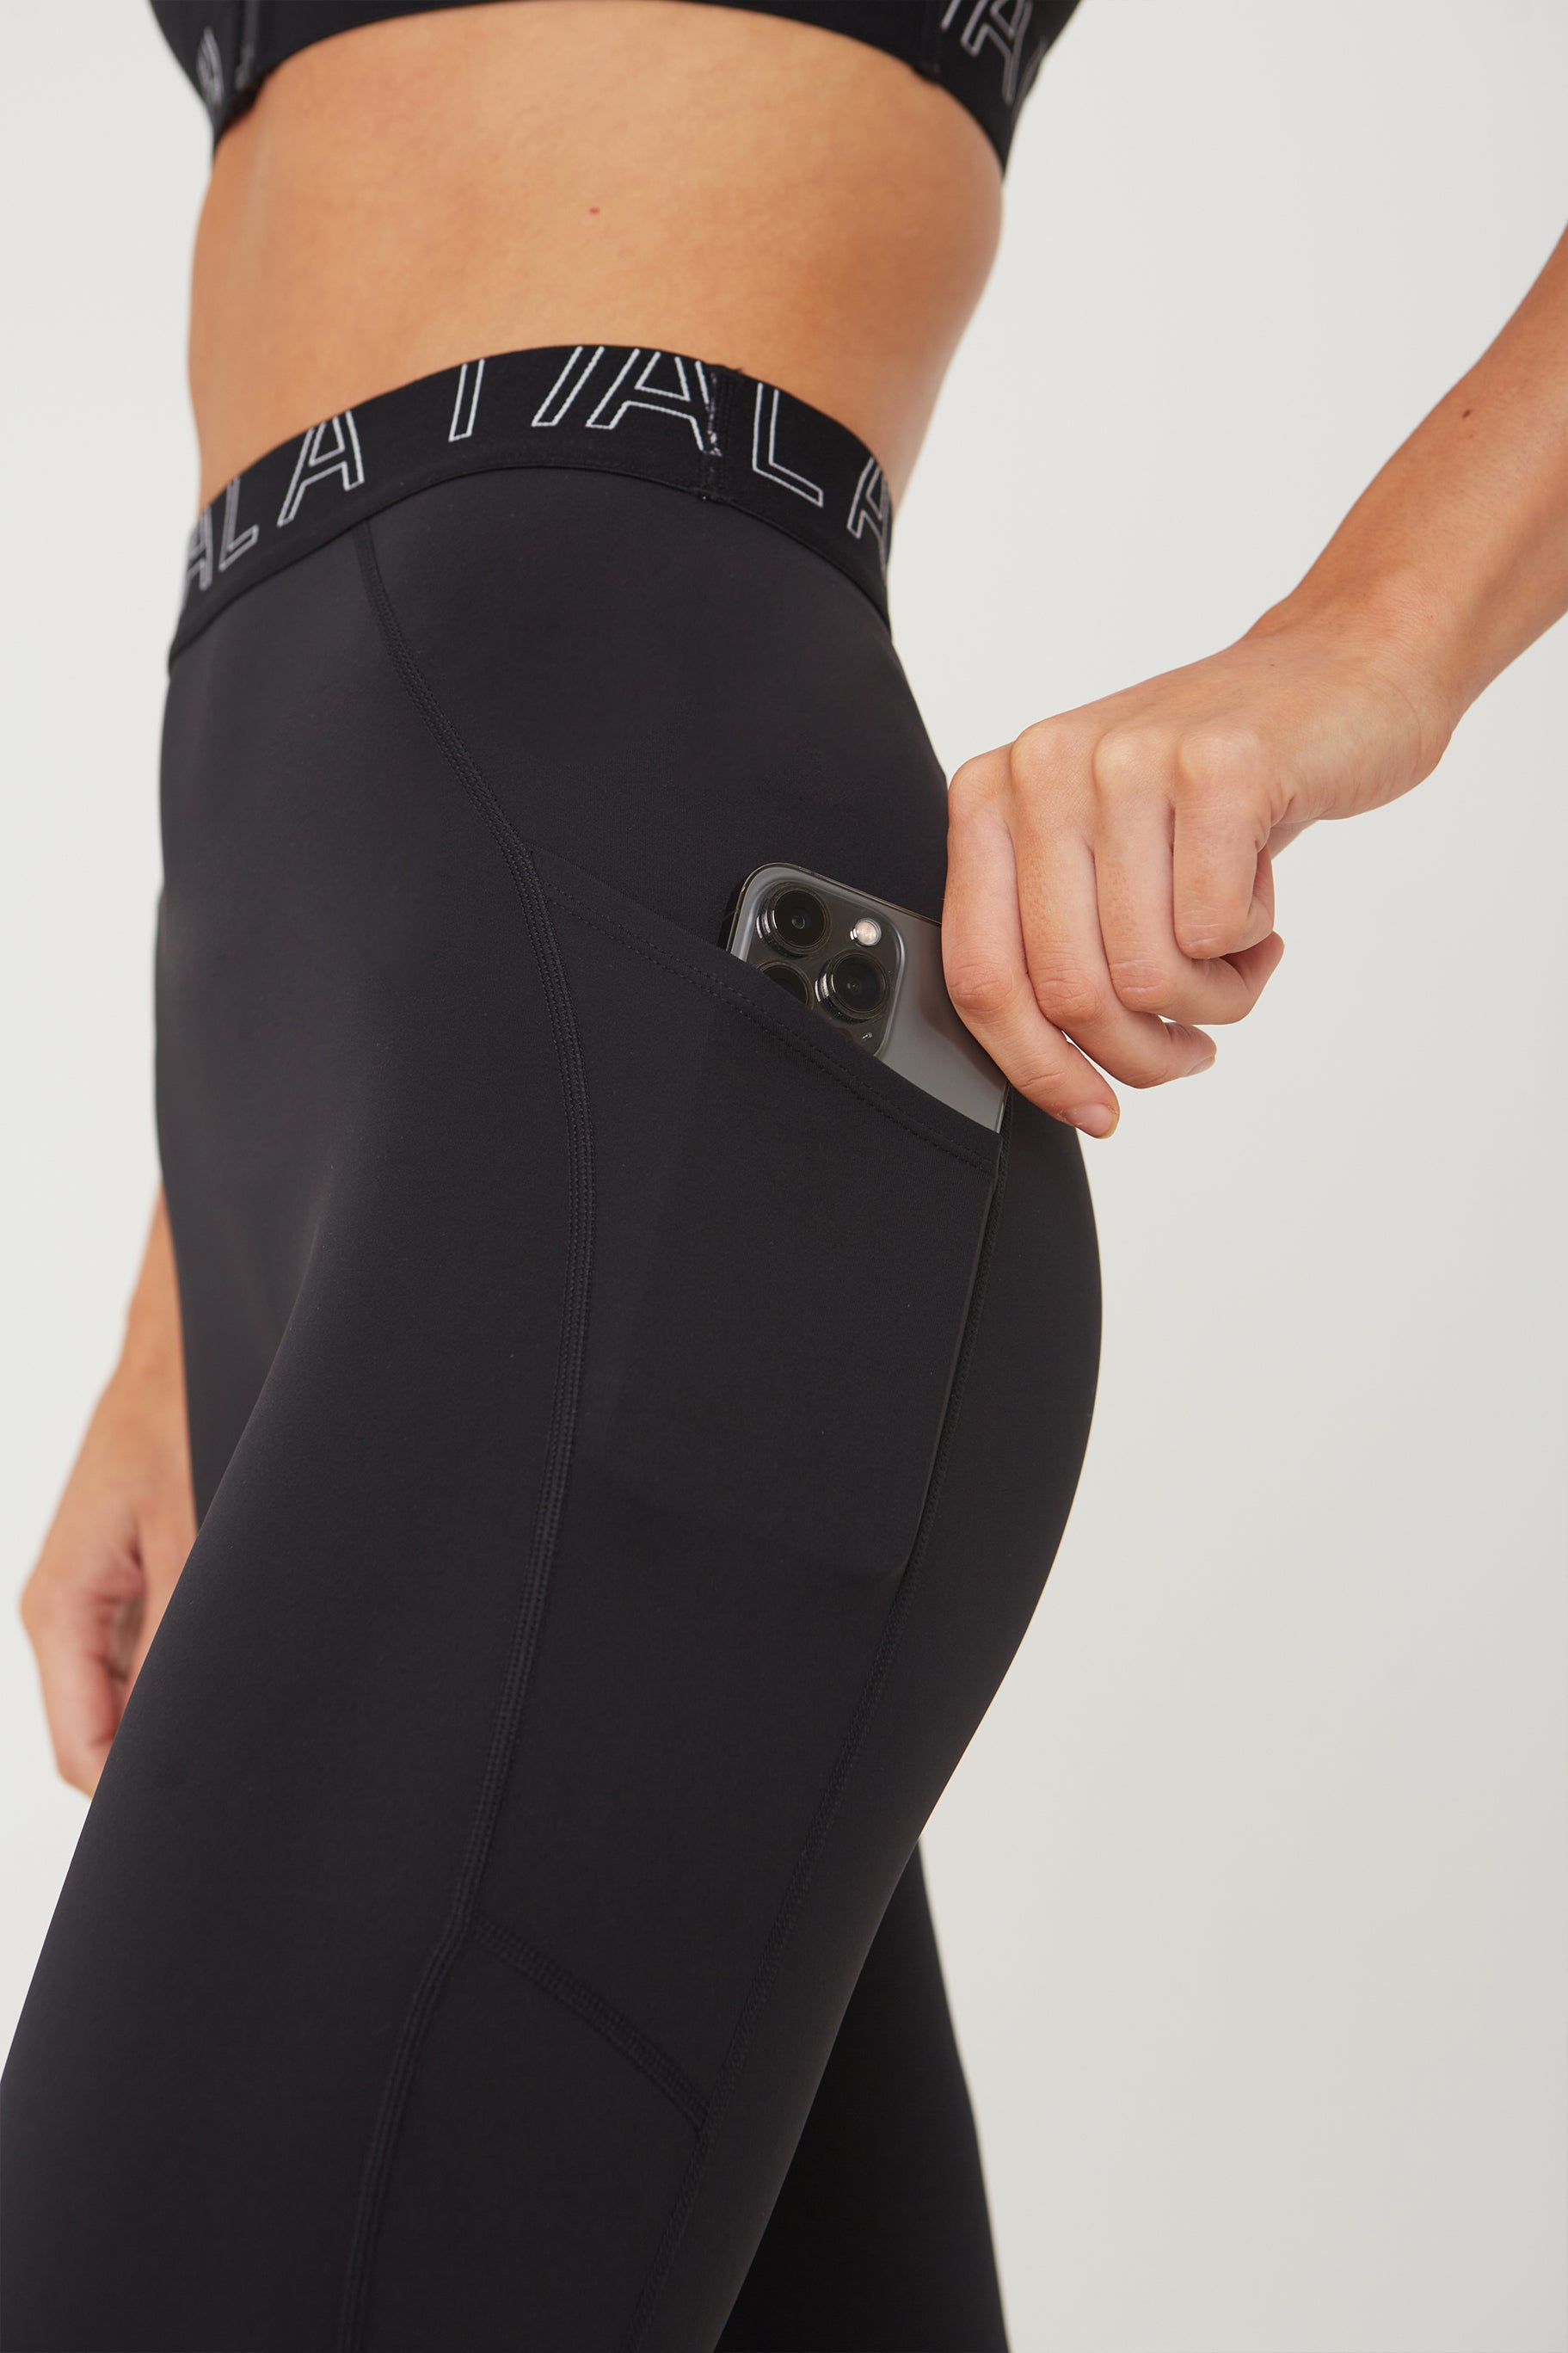 These Yoga Pants With Pockets Are Great for Travel